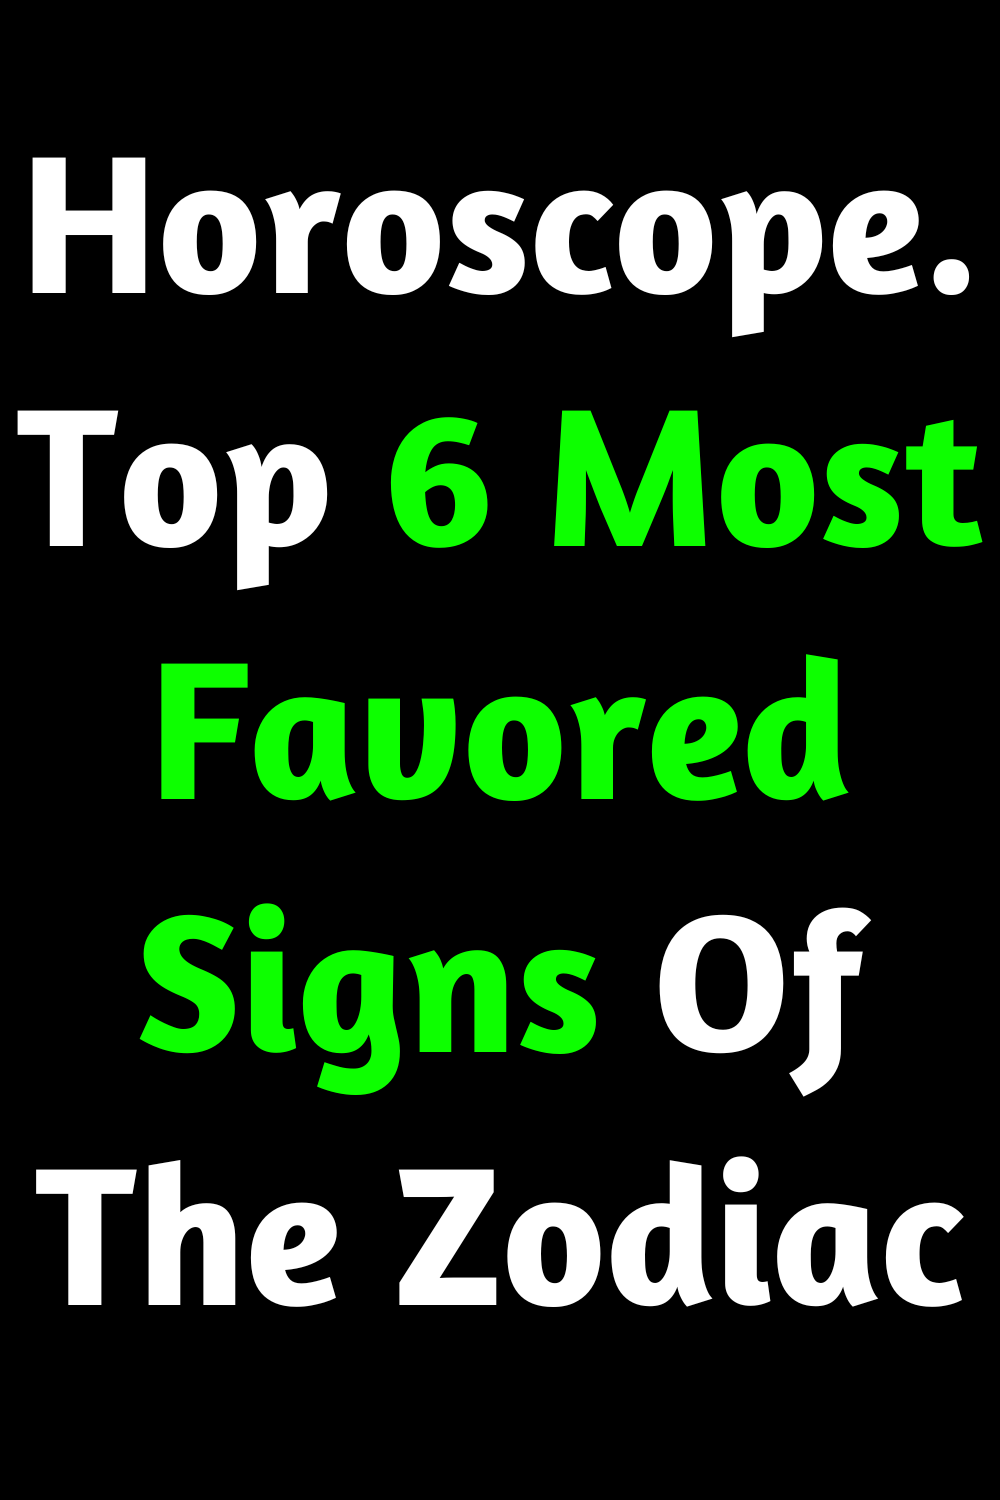 Horoscope. Top 6 Most Favored Signs Of The Zodiac